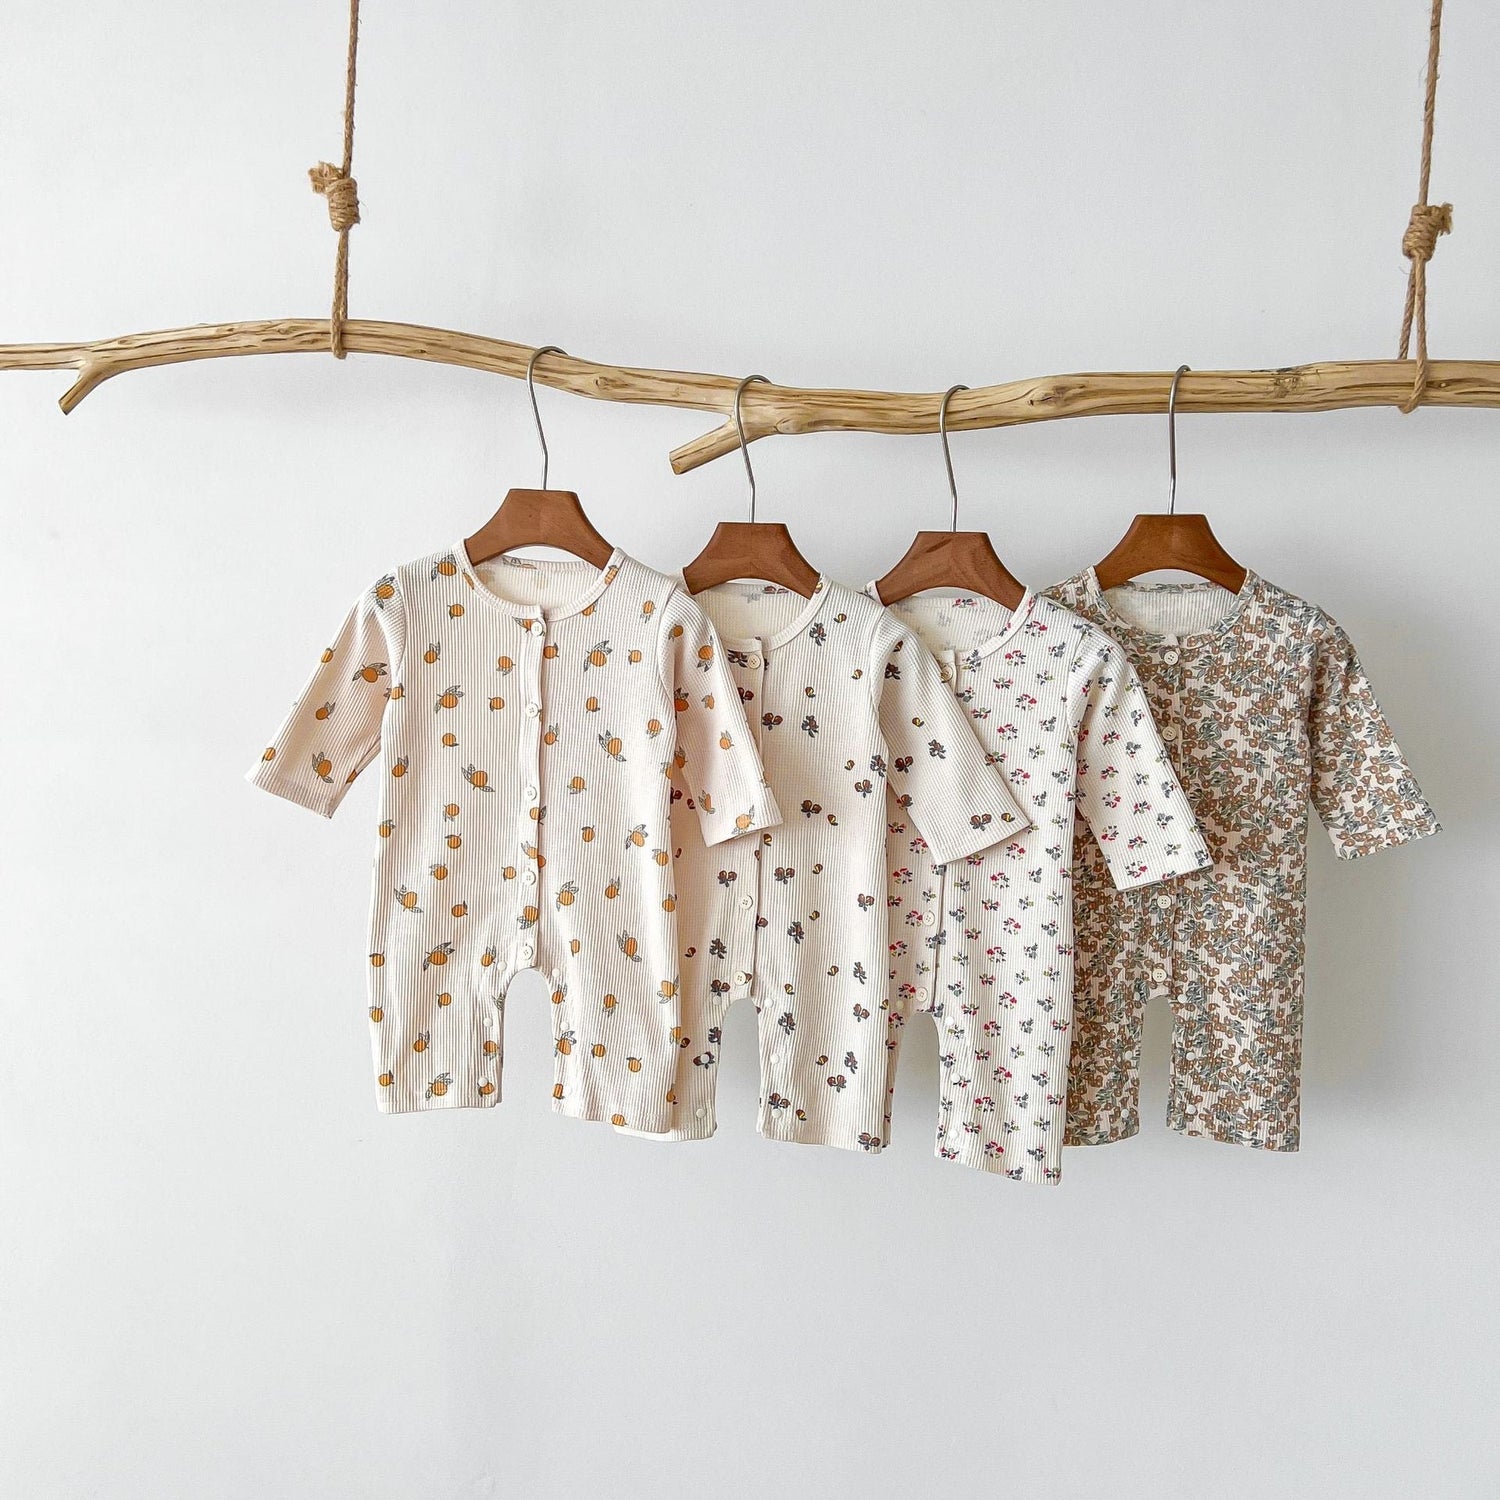 Peruse our selection of stylish rompers for your toddler